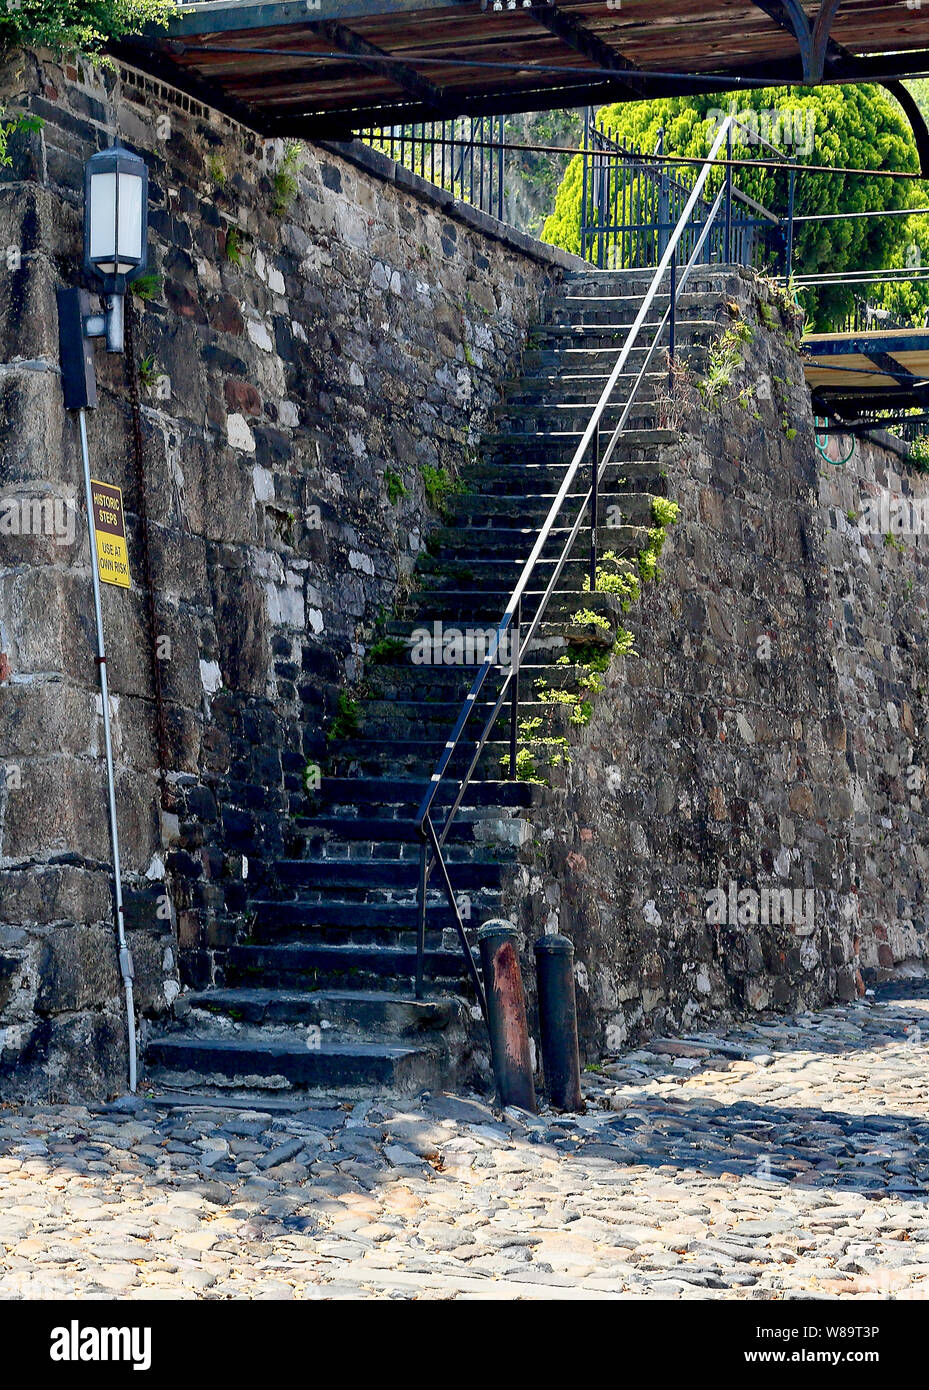 A stone stairway leading up to a higher level from a stone roadway near the Savannah riverfront. Stock Photo